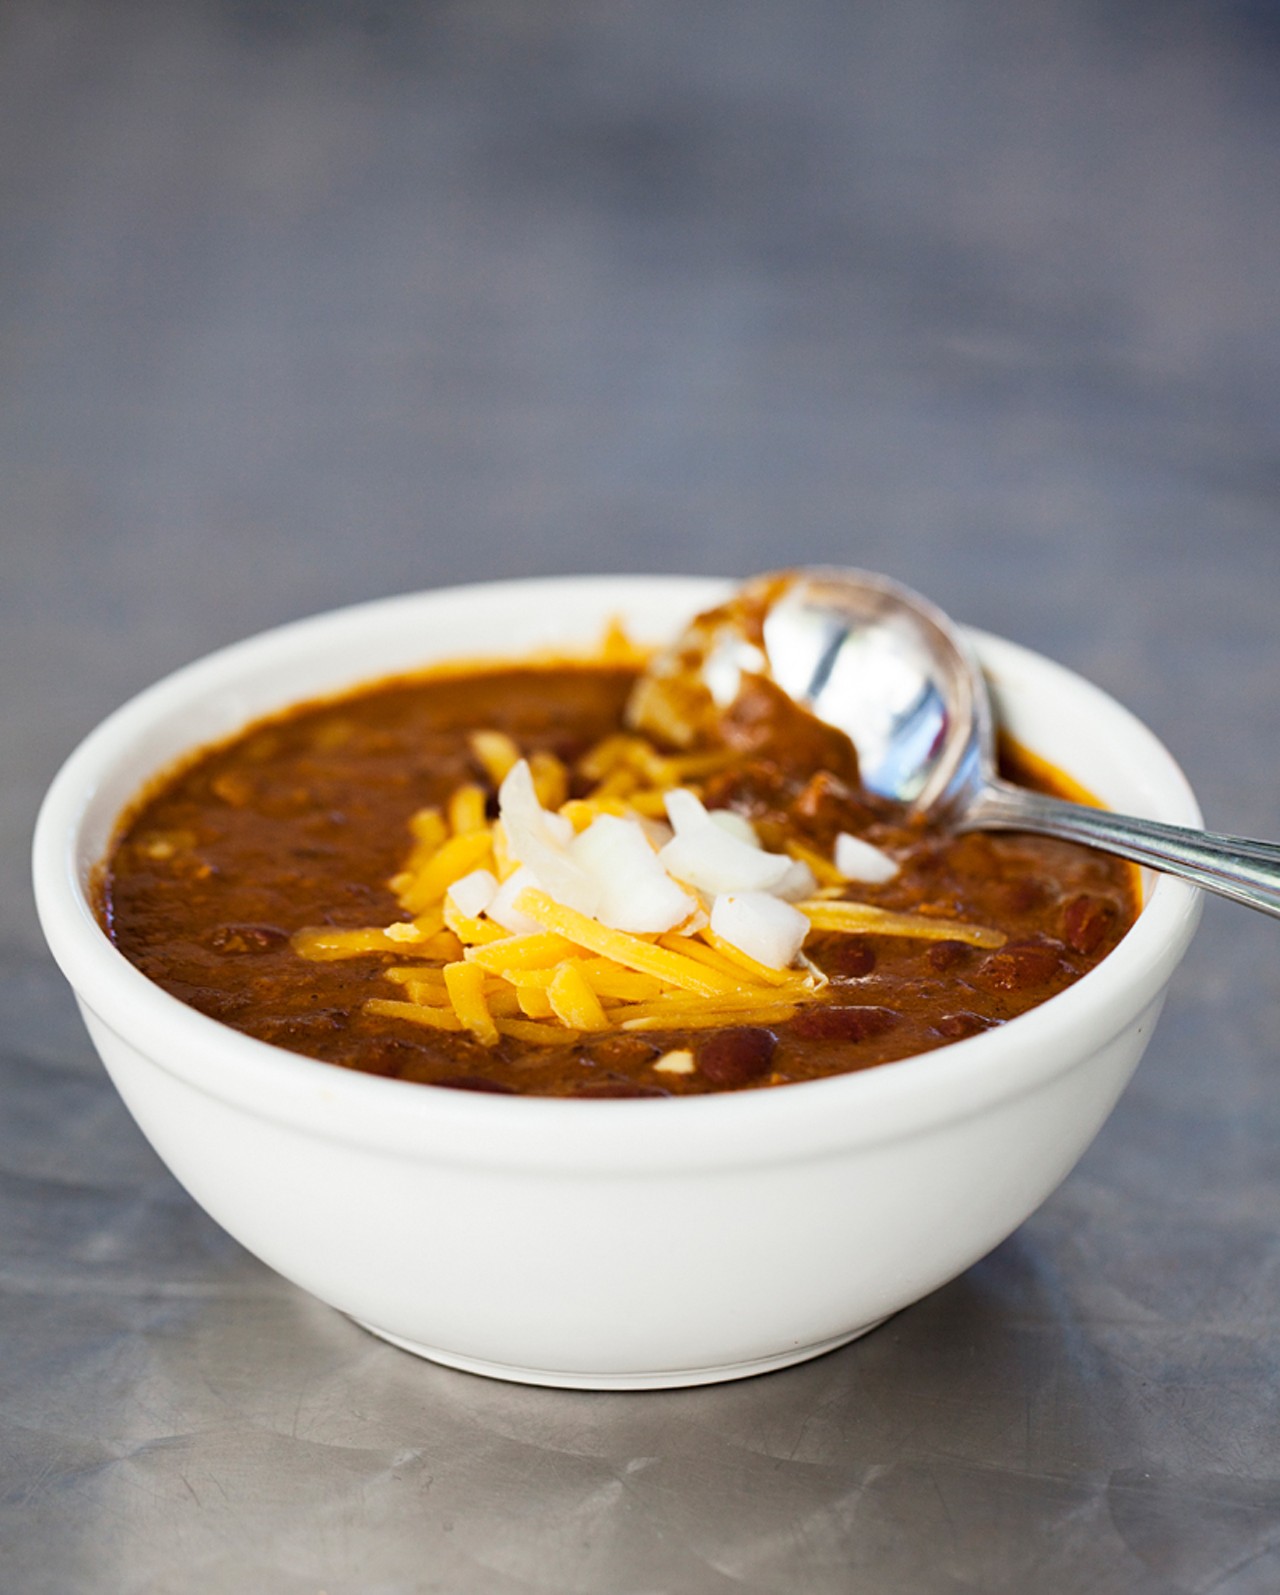 Bowl of chili with cheddar cheese and onions.